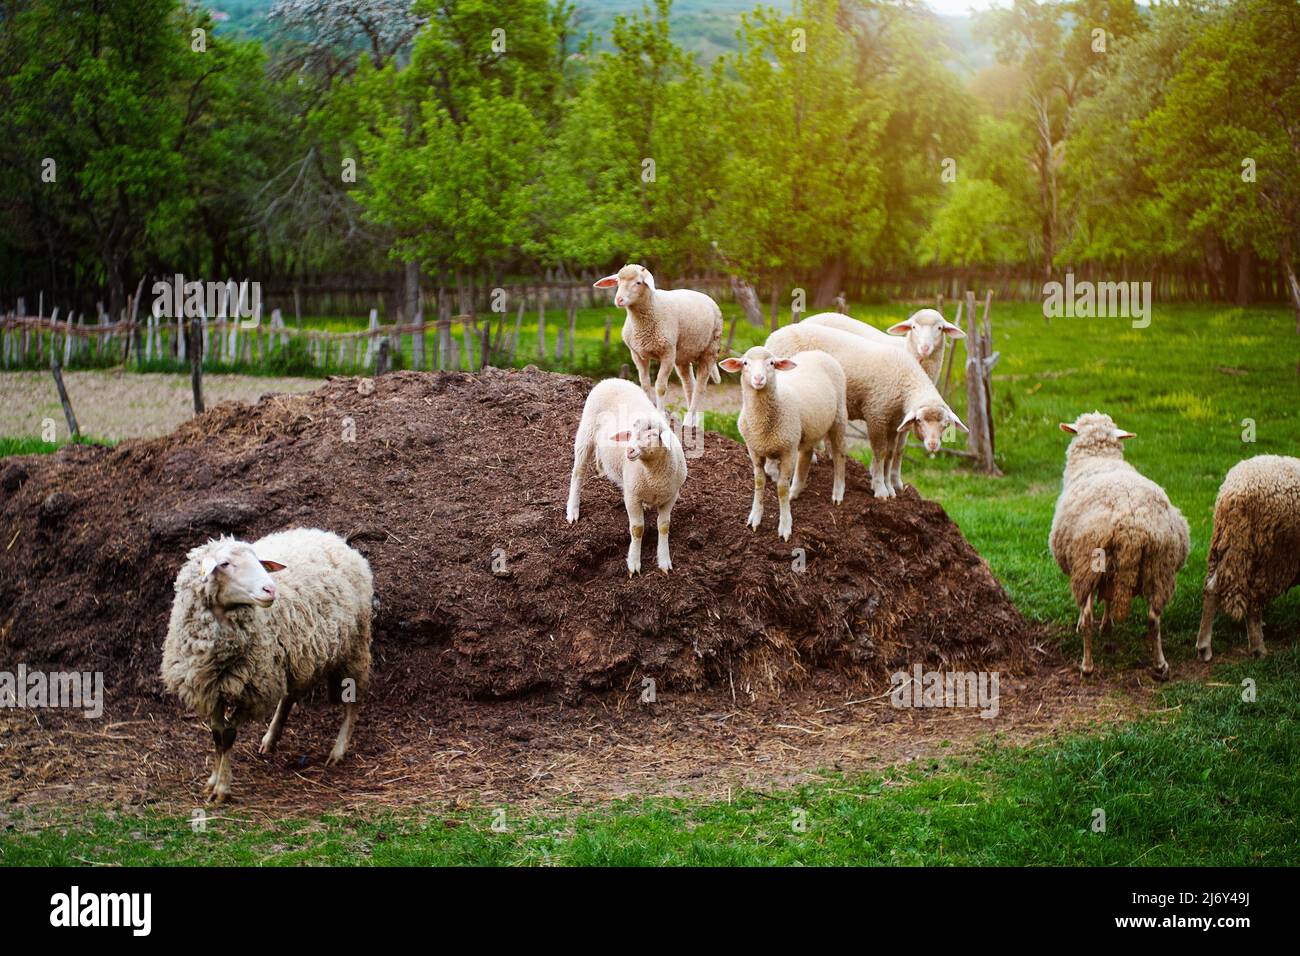 Group of sheep on the countryside Stock Photo